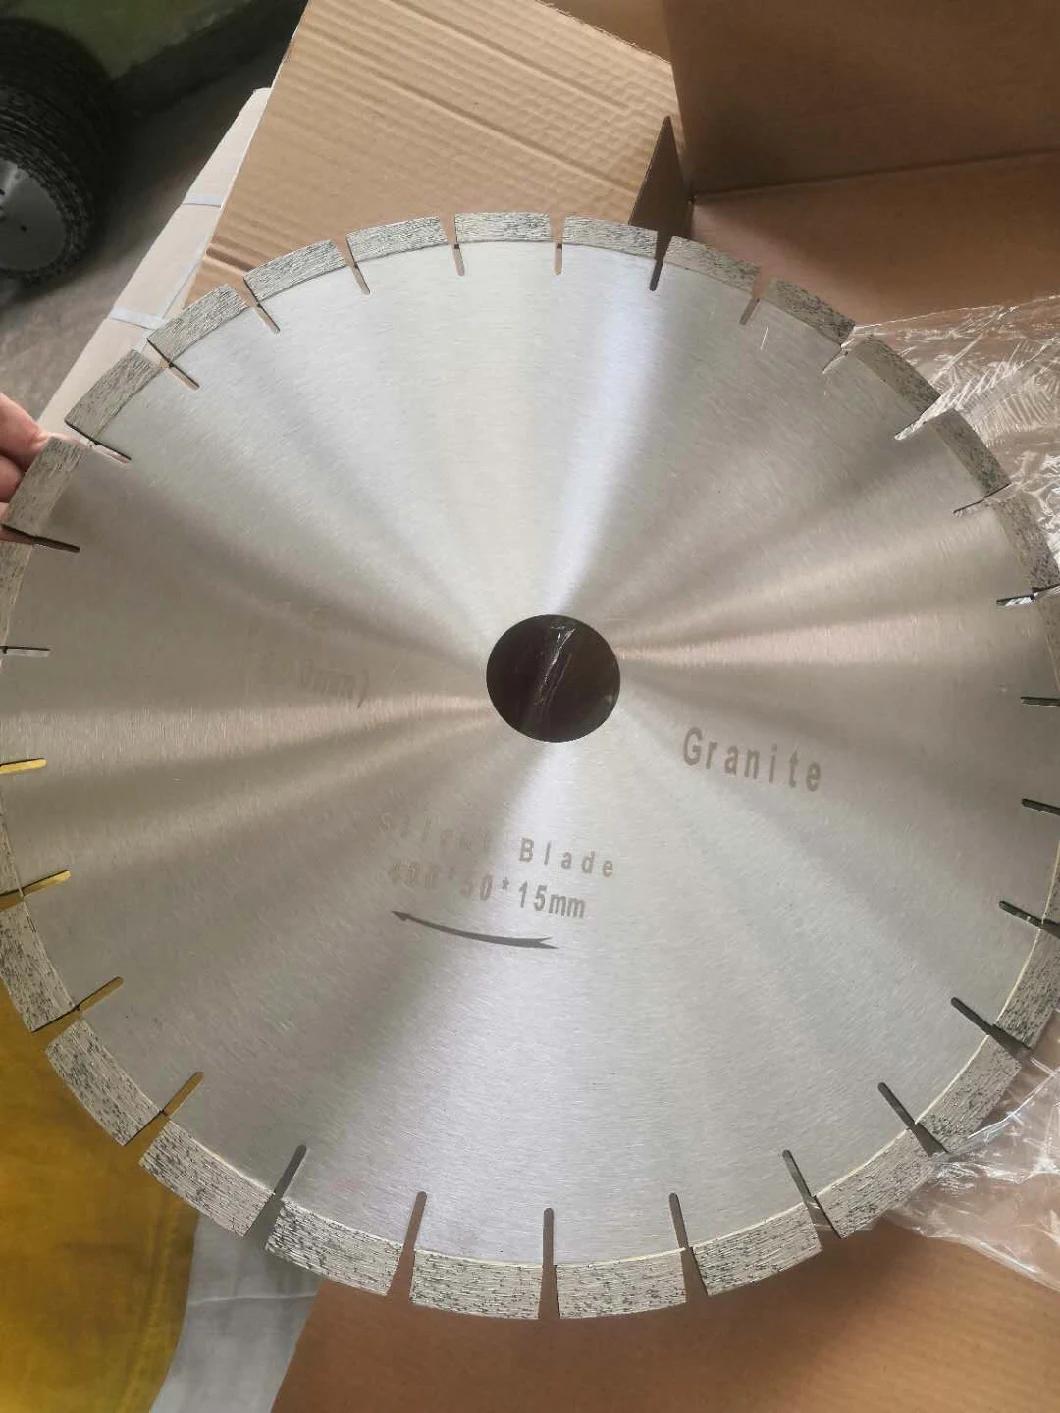 Dimmond Saw Blade Circular Saw Blade for Granite and Marble Cuting